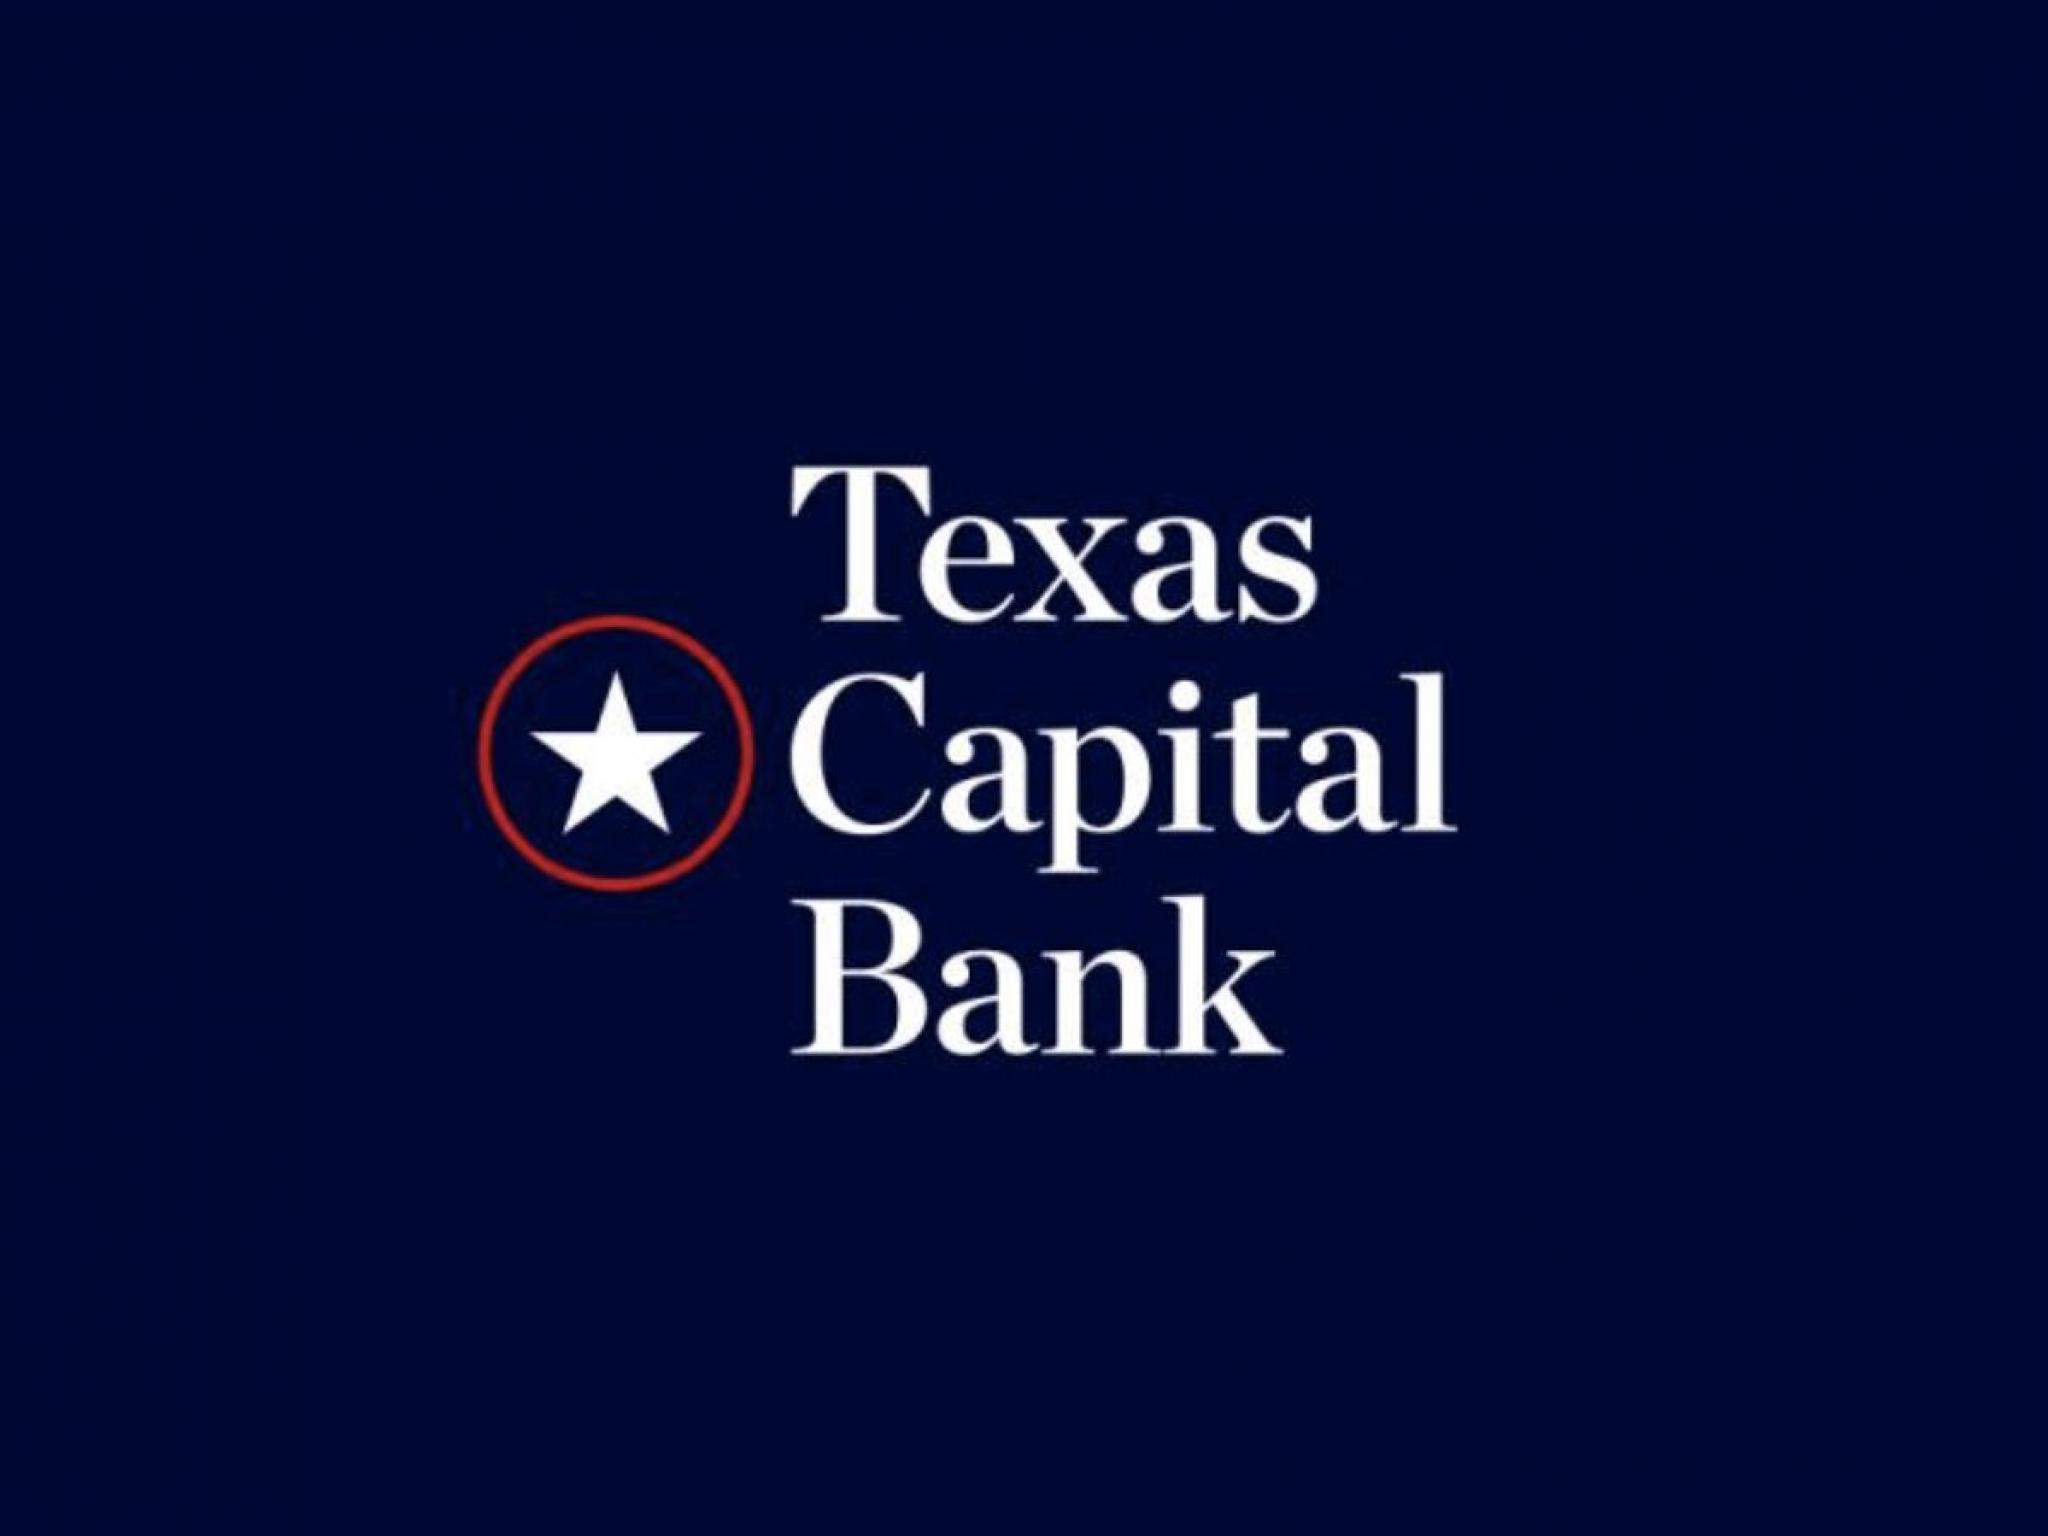  insiders-buying-texas-capital-bancshares-and-3-other-stocks 